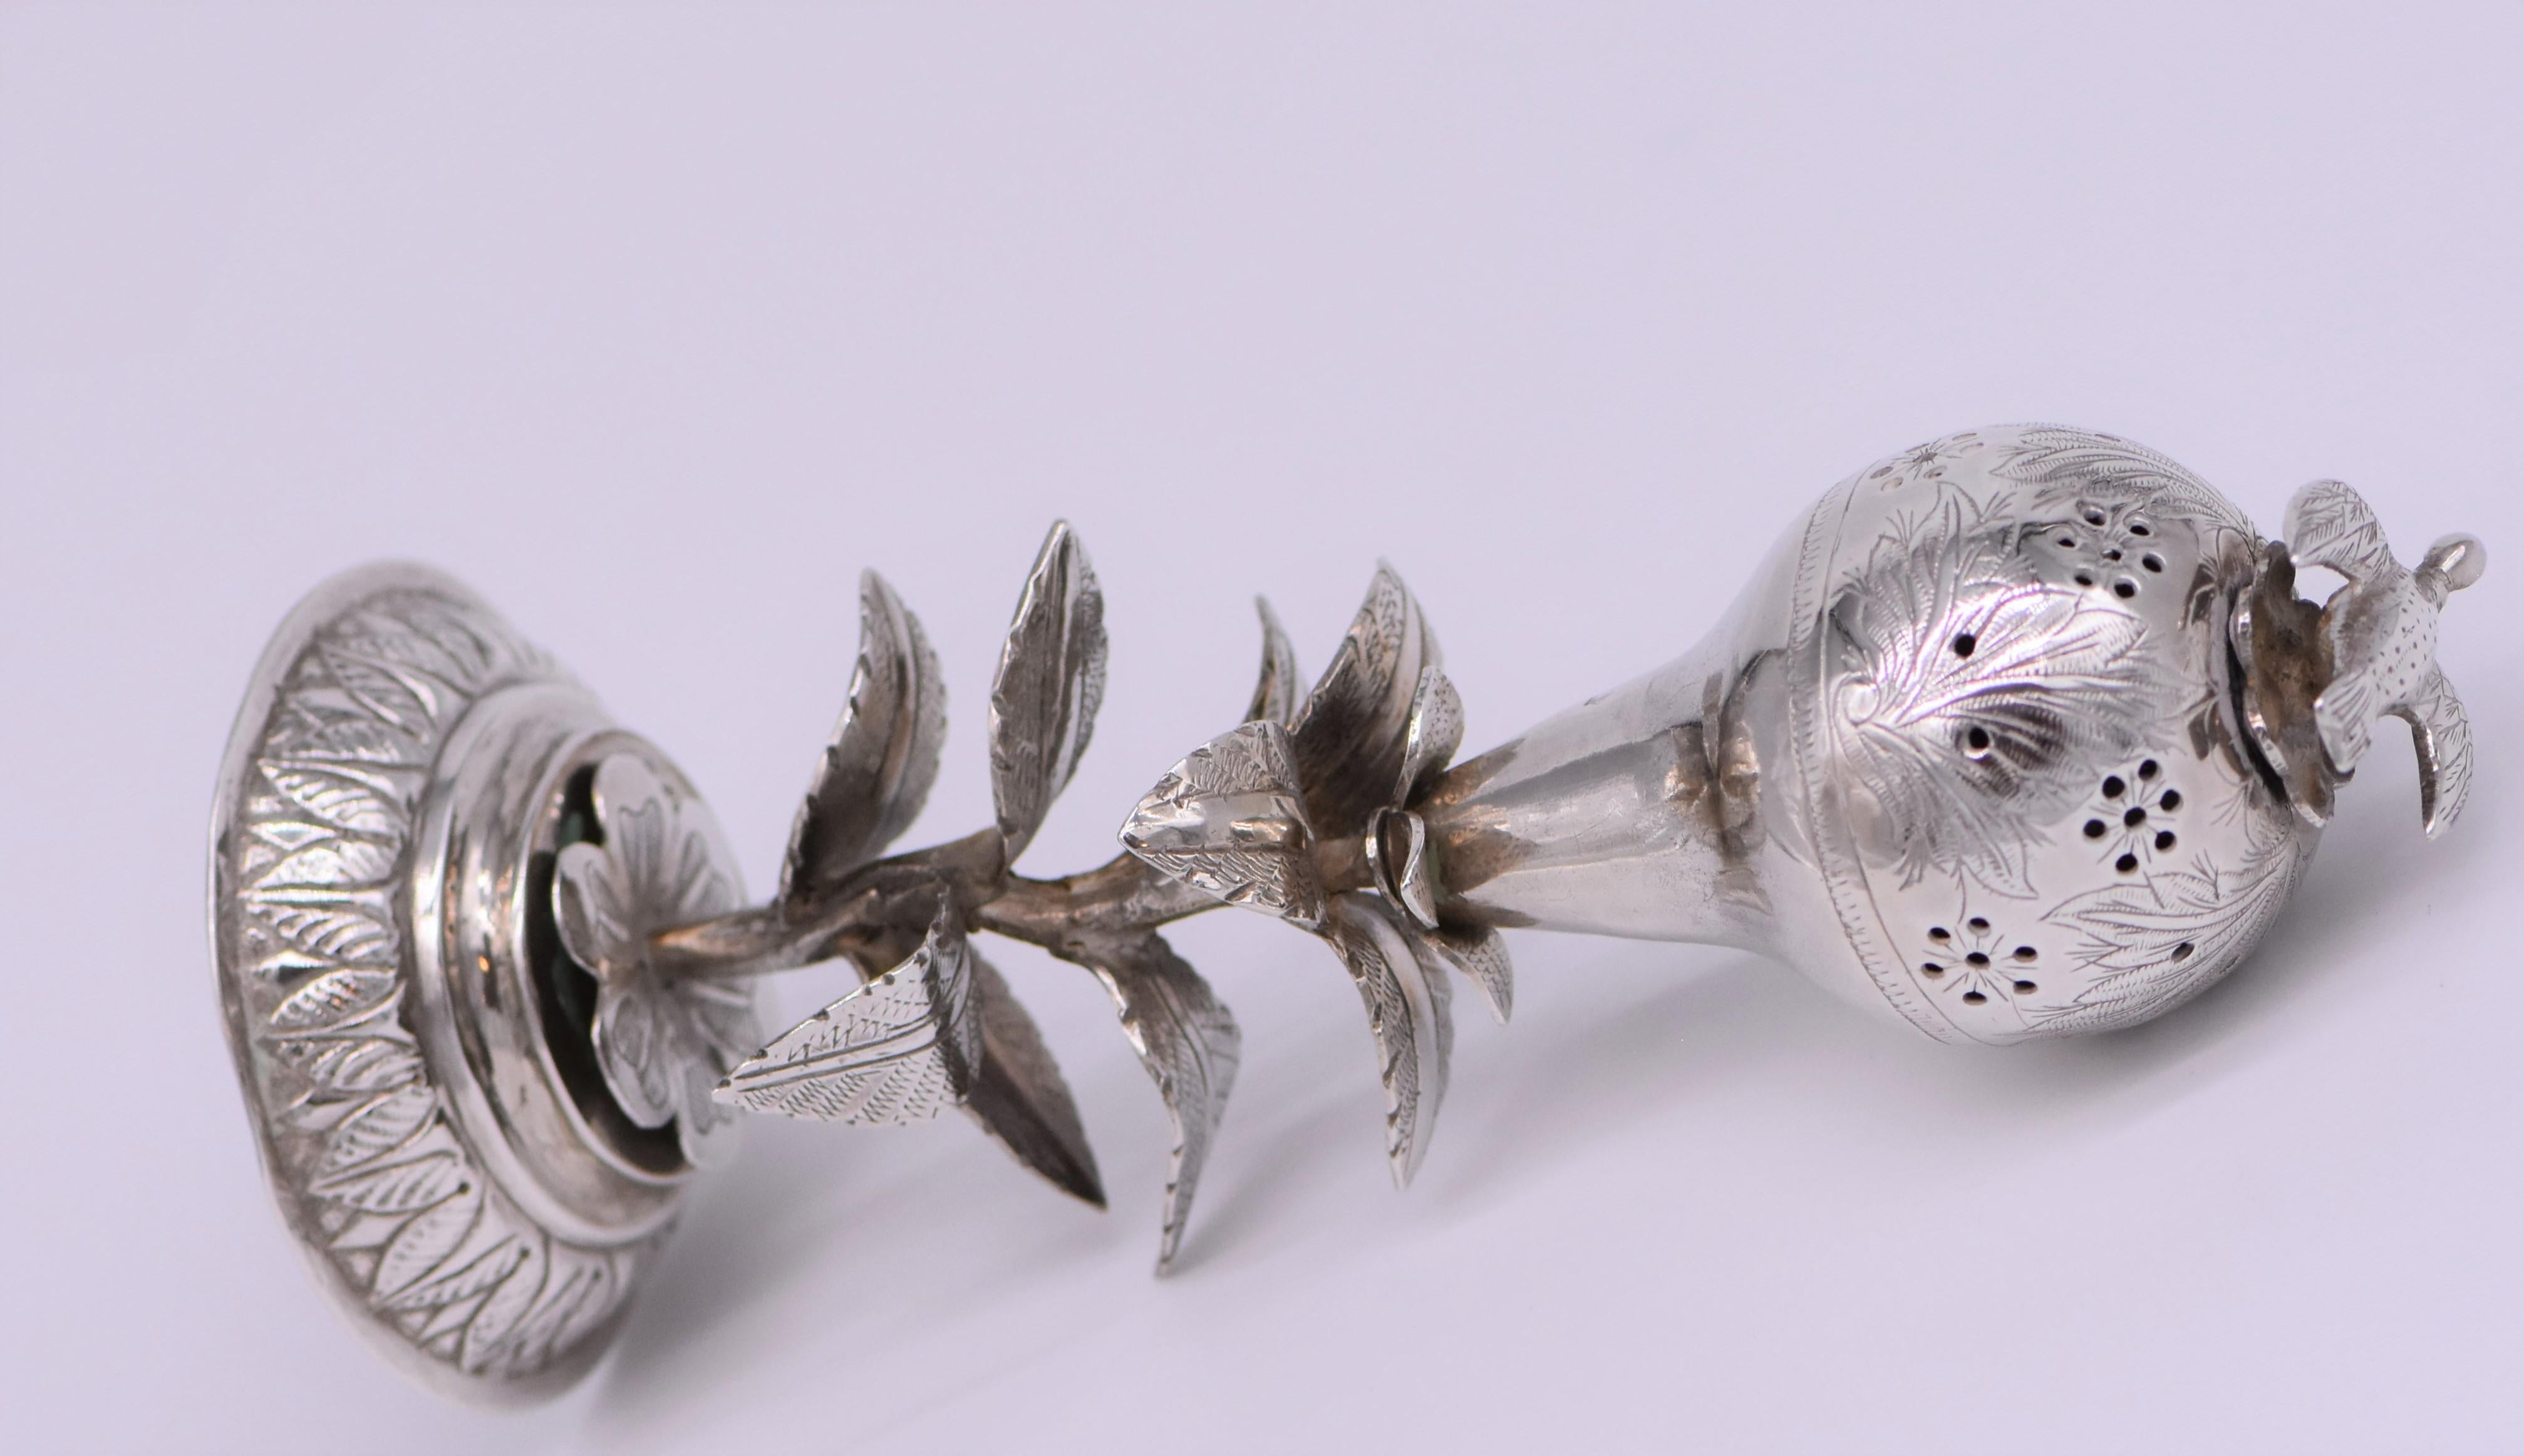 Handmade silver spice container, Russian Empire, circa 1880. 
On a round base with vine shaped stem that leads to engraved upper fruit form portion. 
Topped with a bird finial. 
Marked with Russian silver hallmarks. 

Every item in Menorah Galleries